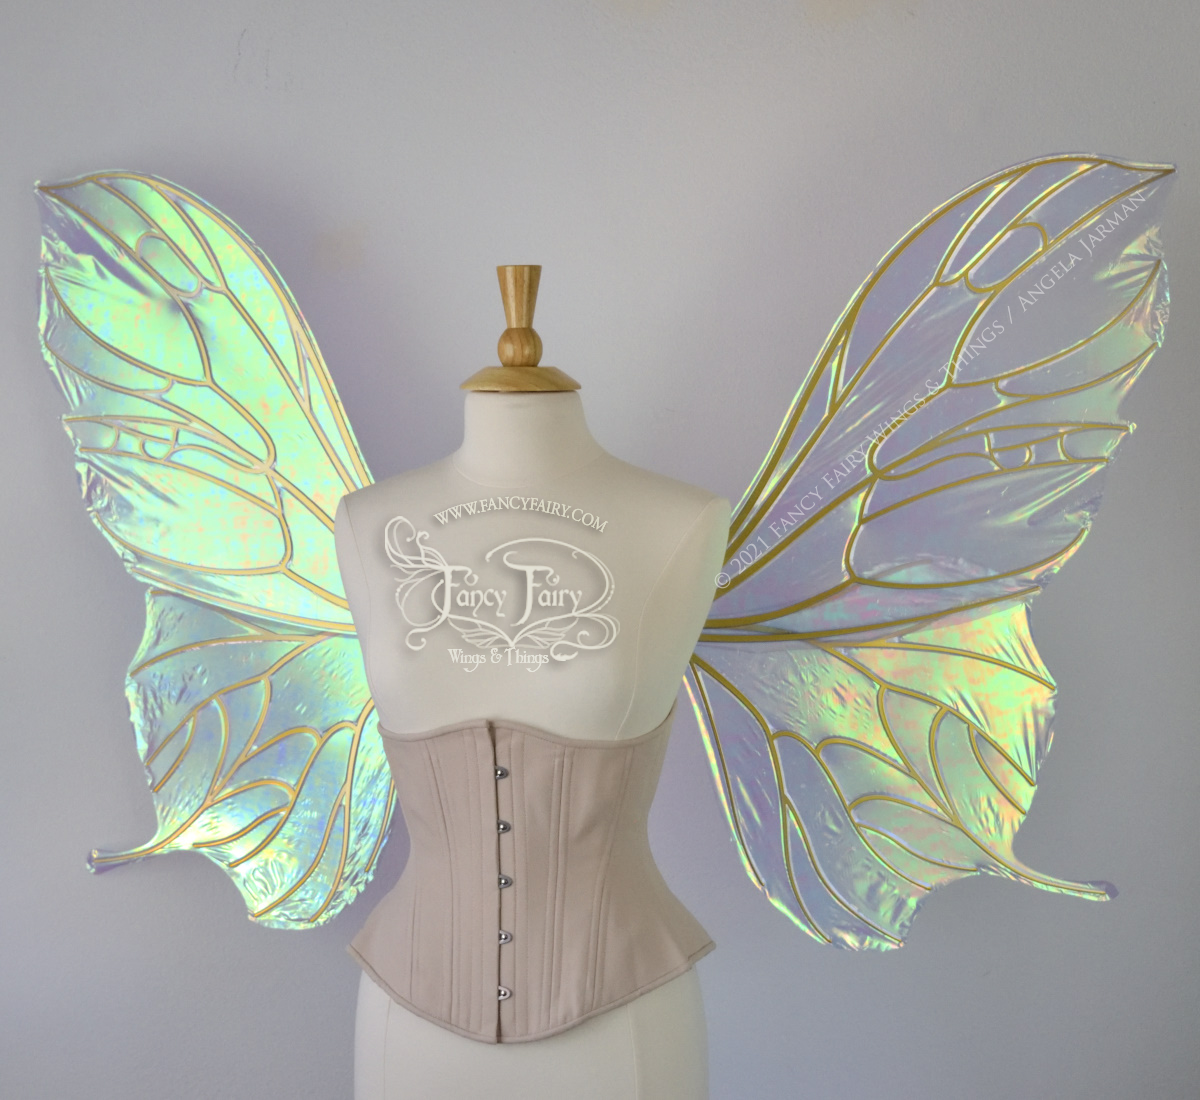 Extra Large Pansy Iridescent Convertible Fairy Wings in Baby Blue with Gold veins